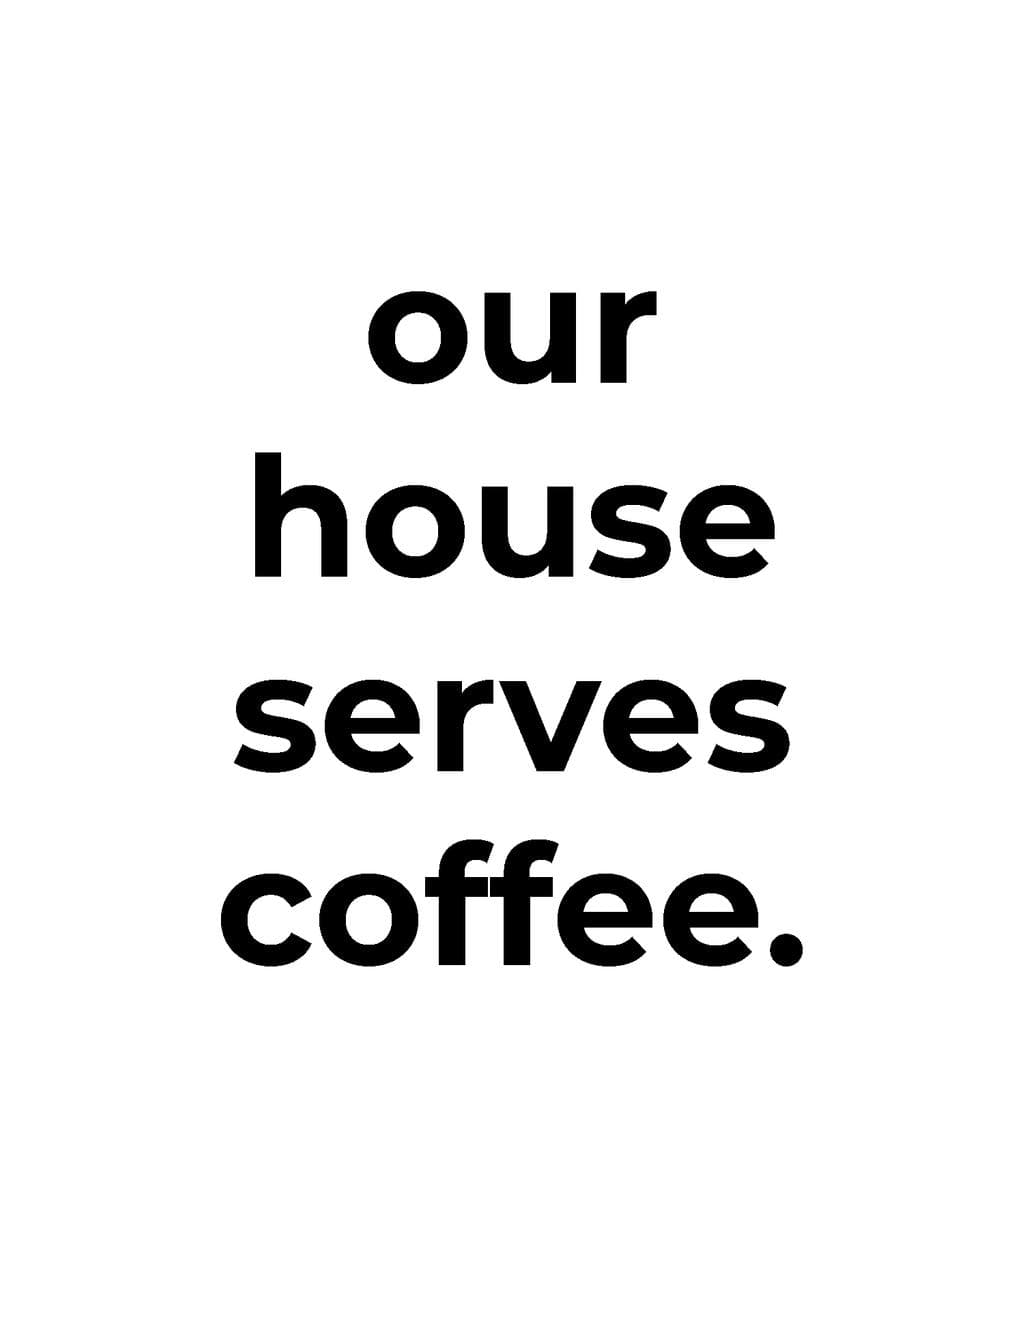 Our house serves coffee.